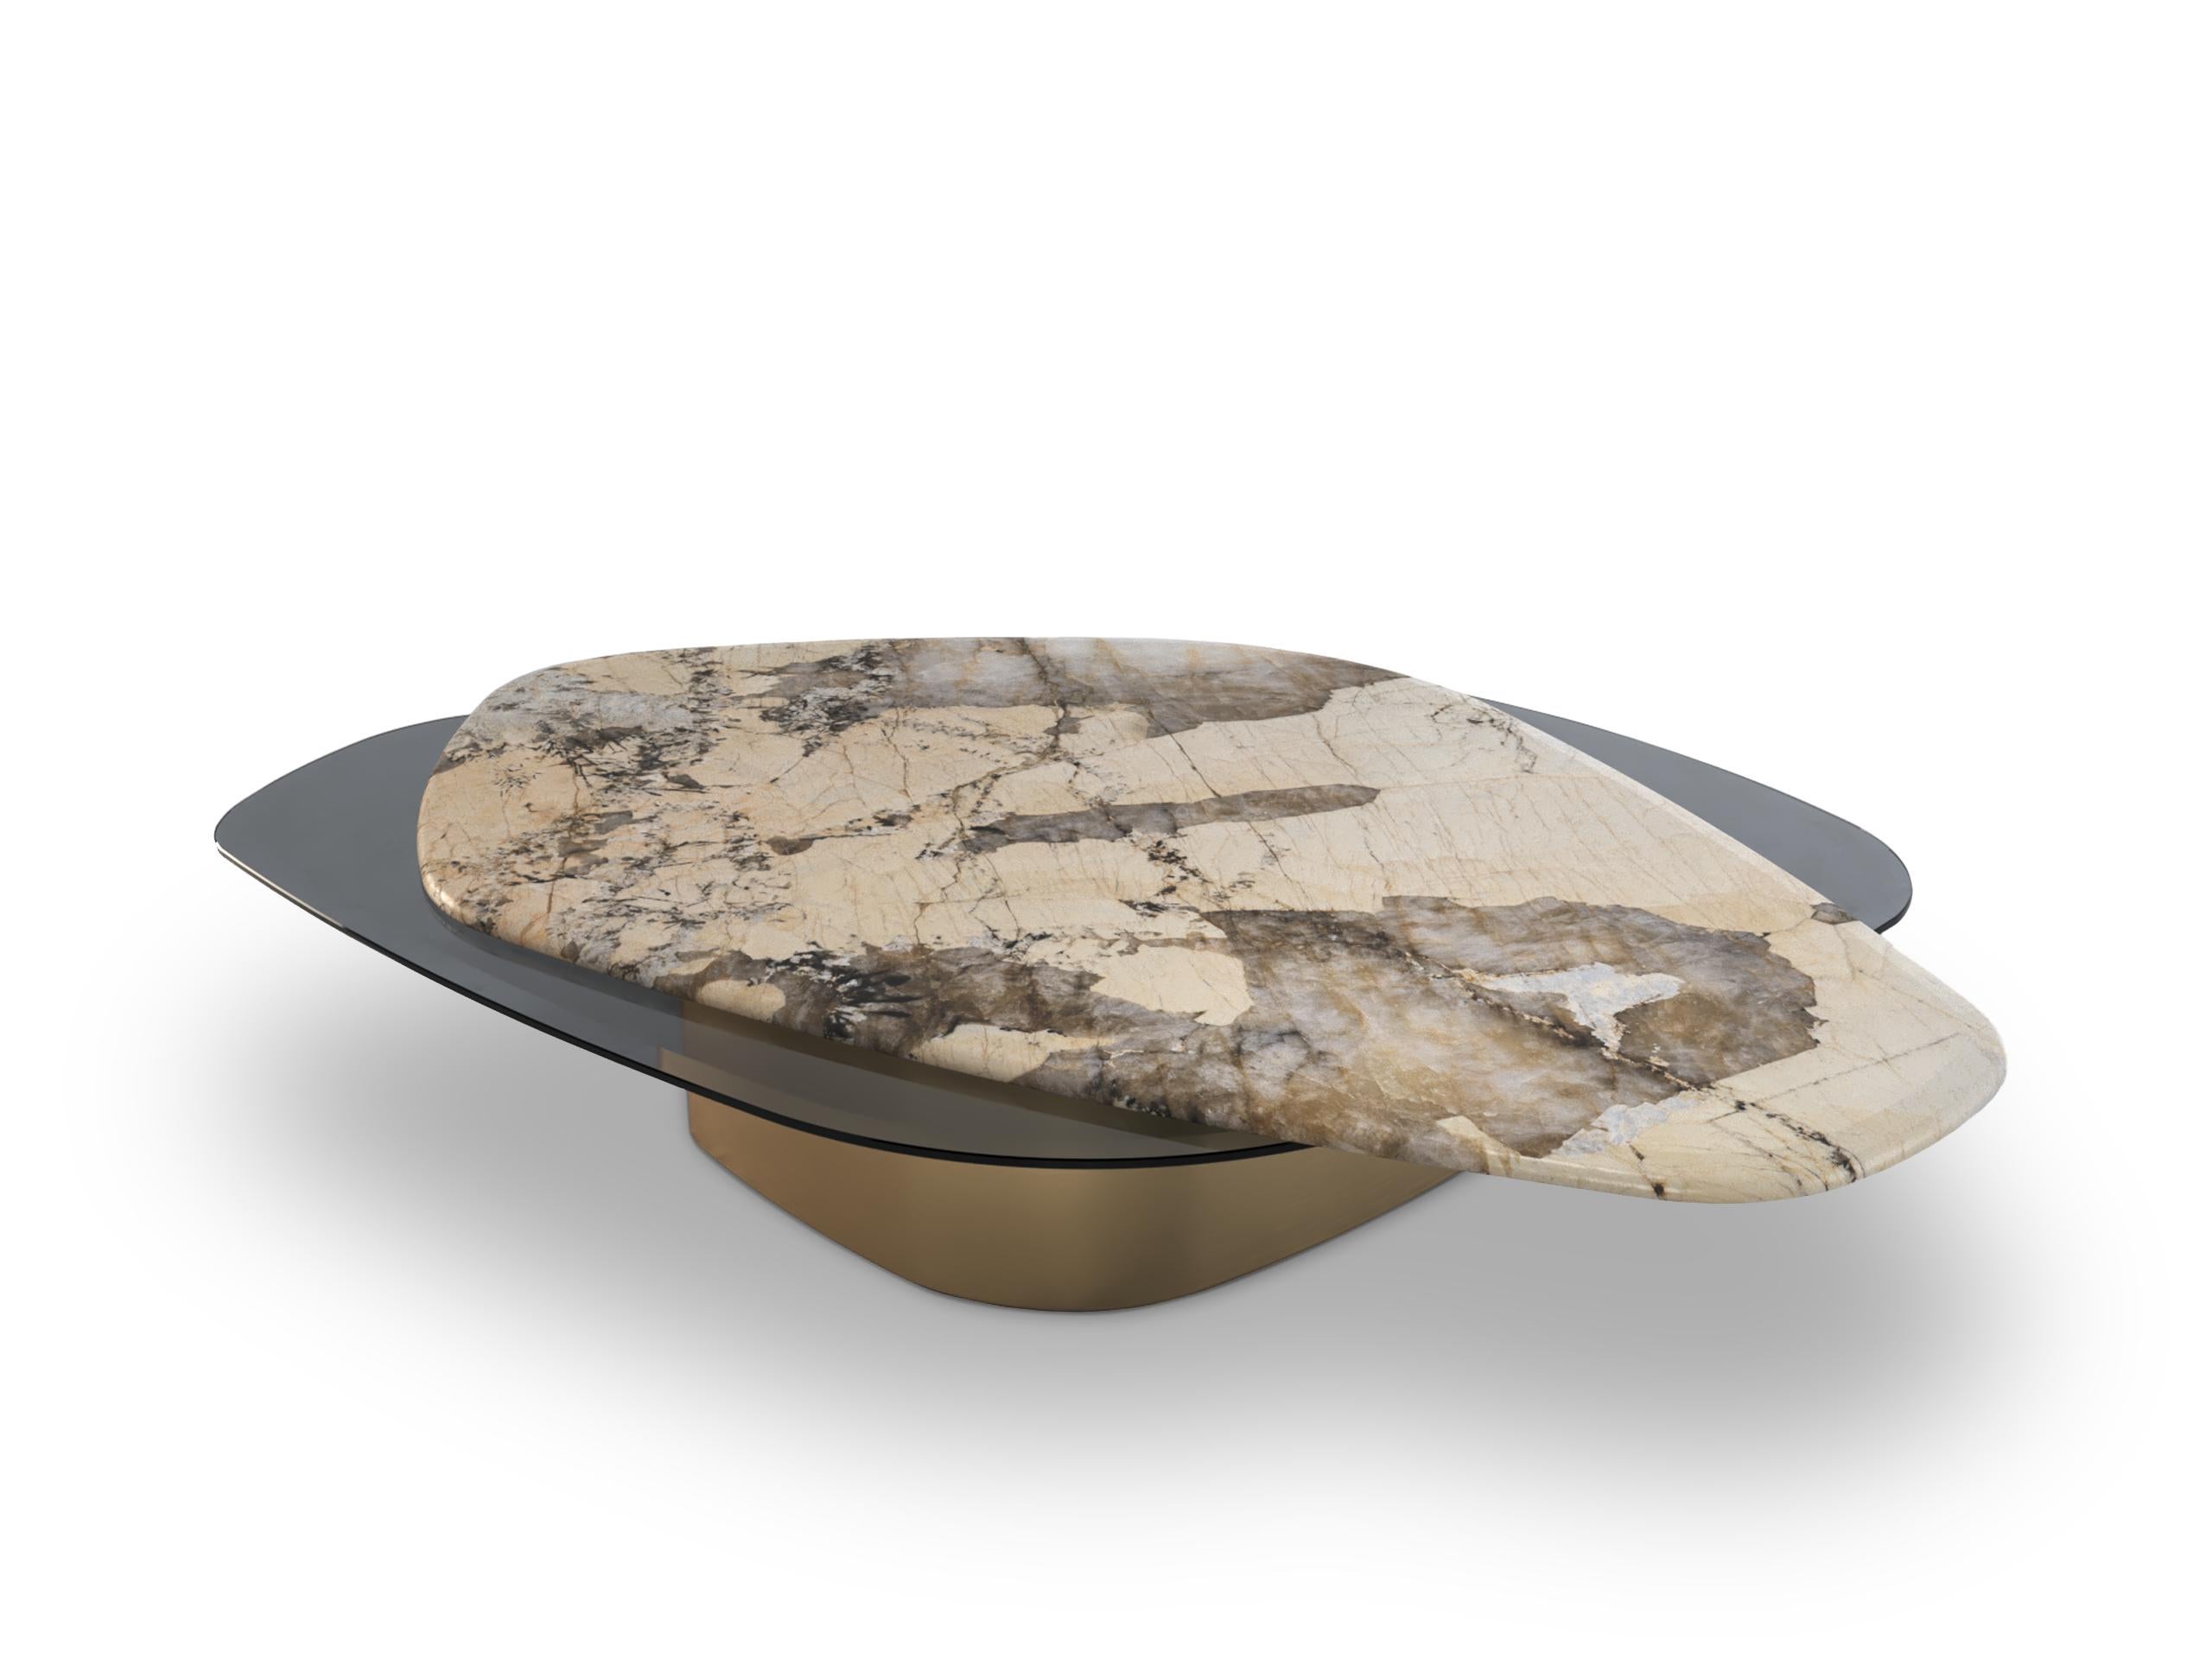 The elements VII coffee table, 1 of 1 by Grzegorz Majka
Edition 1 of 1
Dimensions:  W 172.7  x D 119.3 x H 35.5 cm
Materials: Glass, quartz and brass

“The Elements VIII” is one of a kind and one of the series of various coffee tables that will be